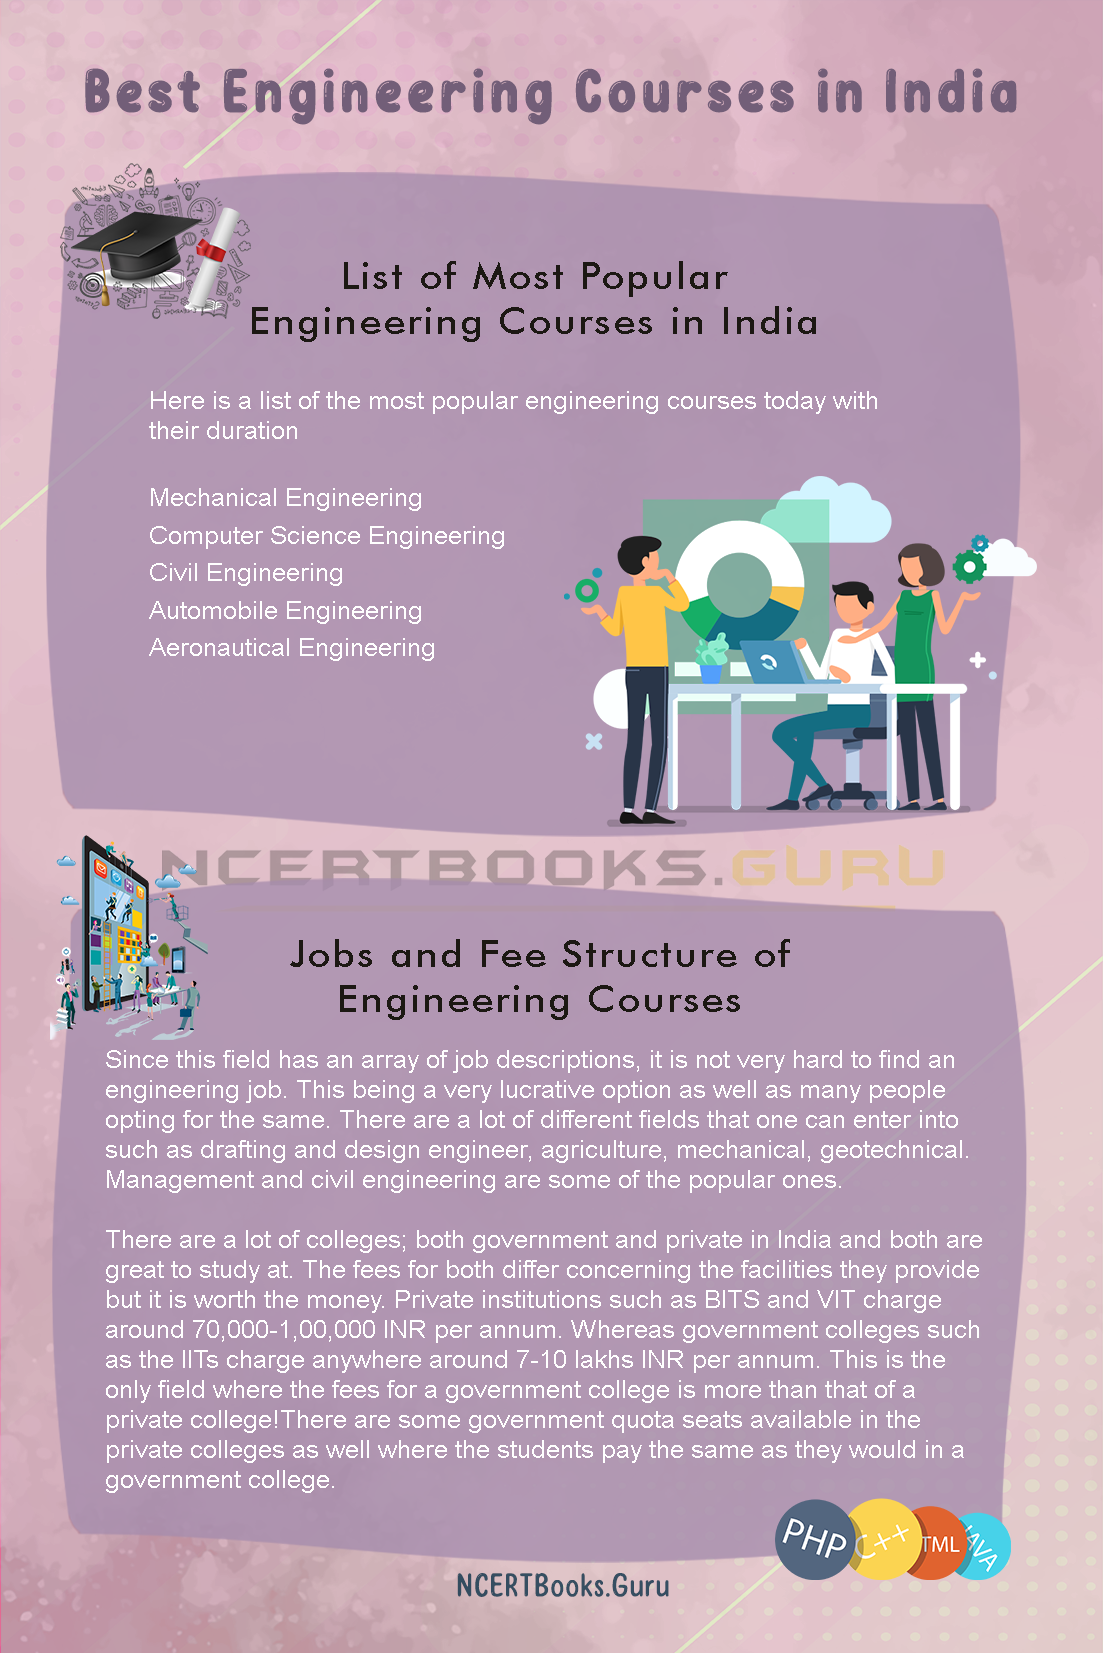 Best Engineering Courses in India